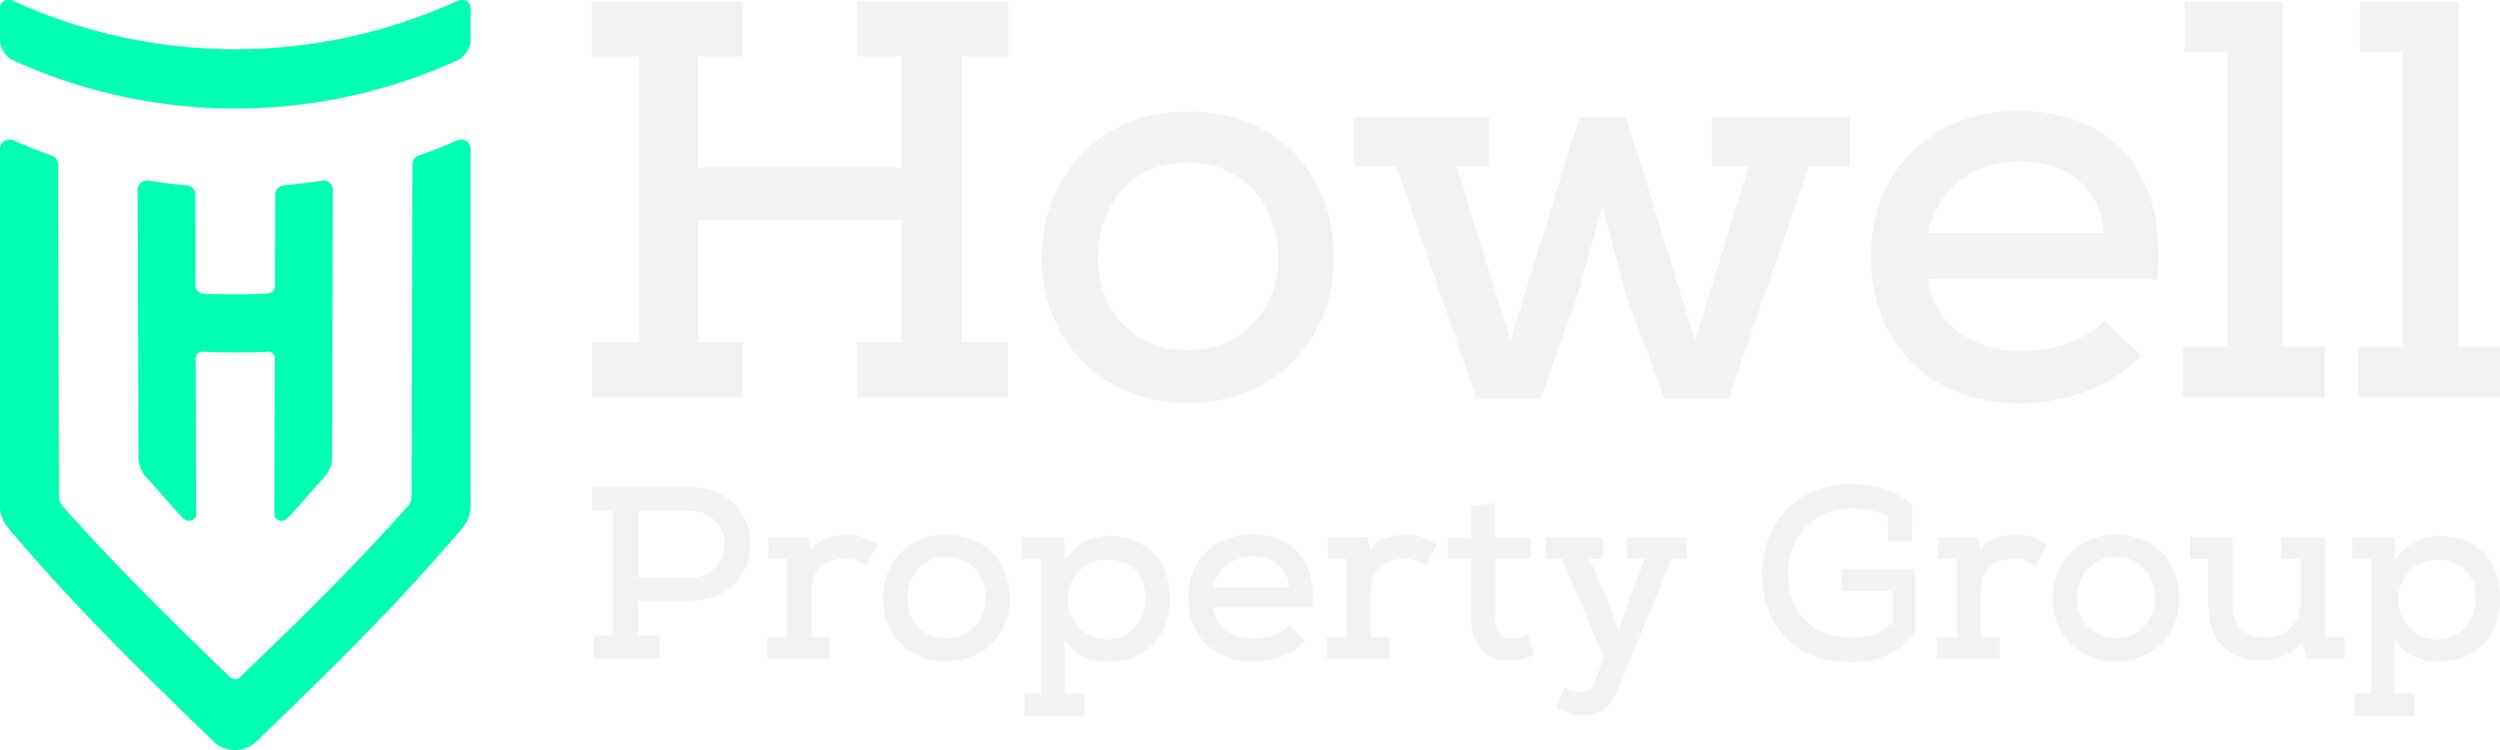 Copy of Howell Property Group_Linear Reversed.jpg